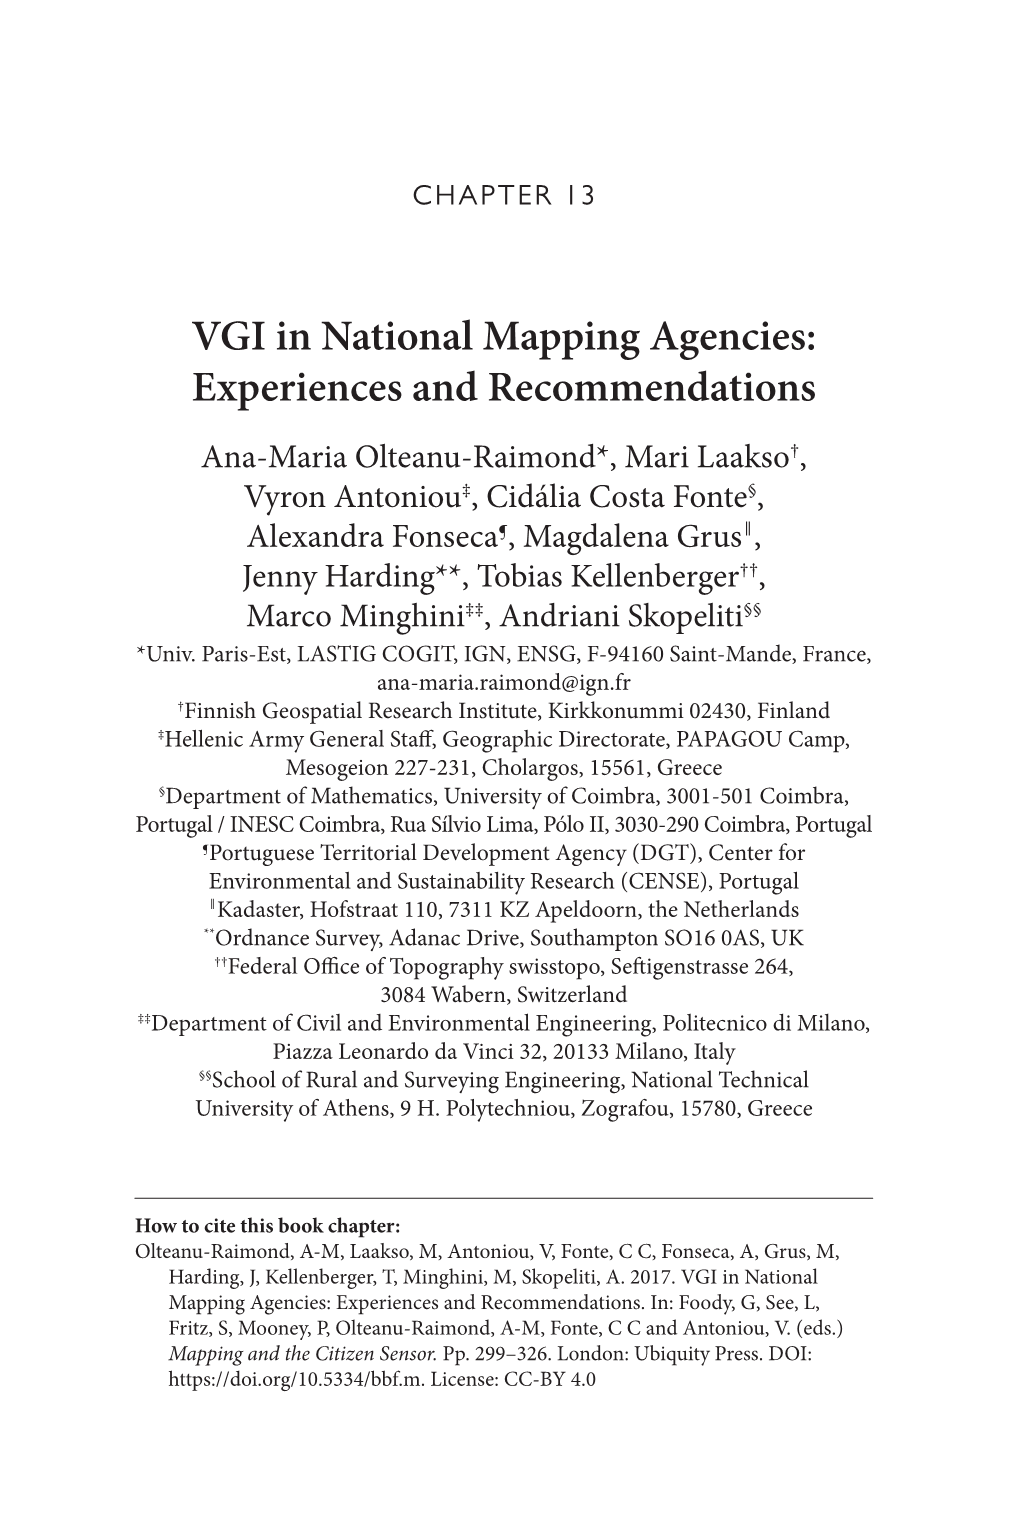 VGI in National Mapping Agencies: Experiences and Recommendations